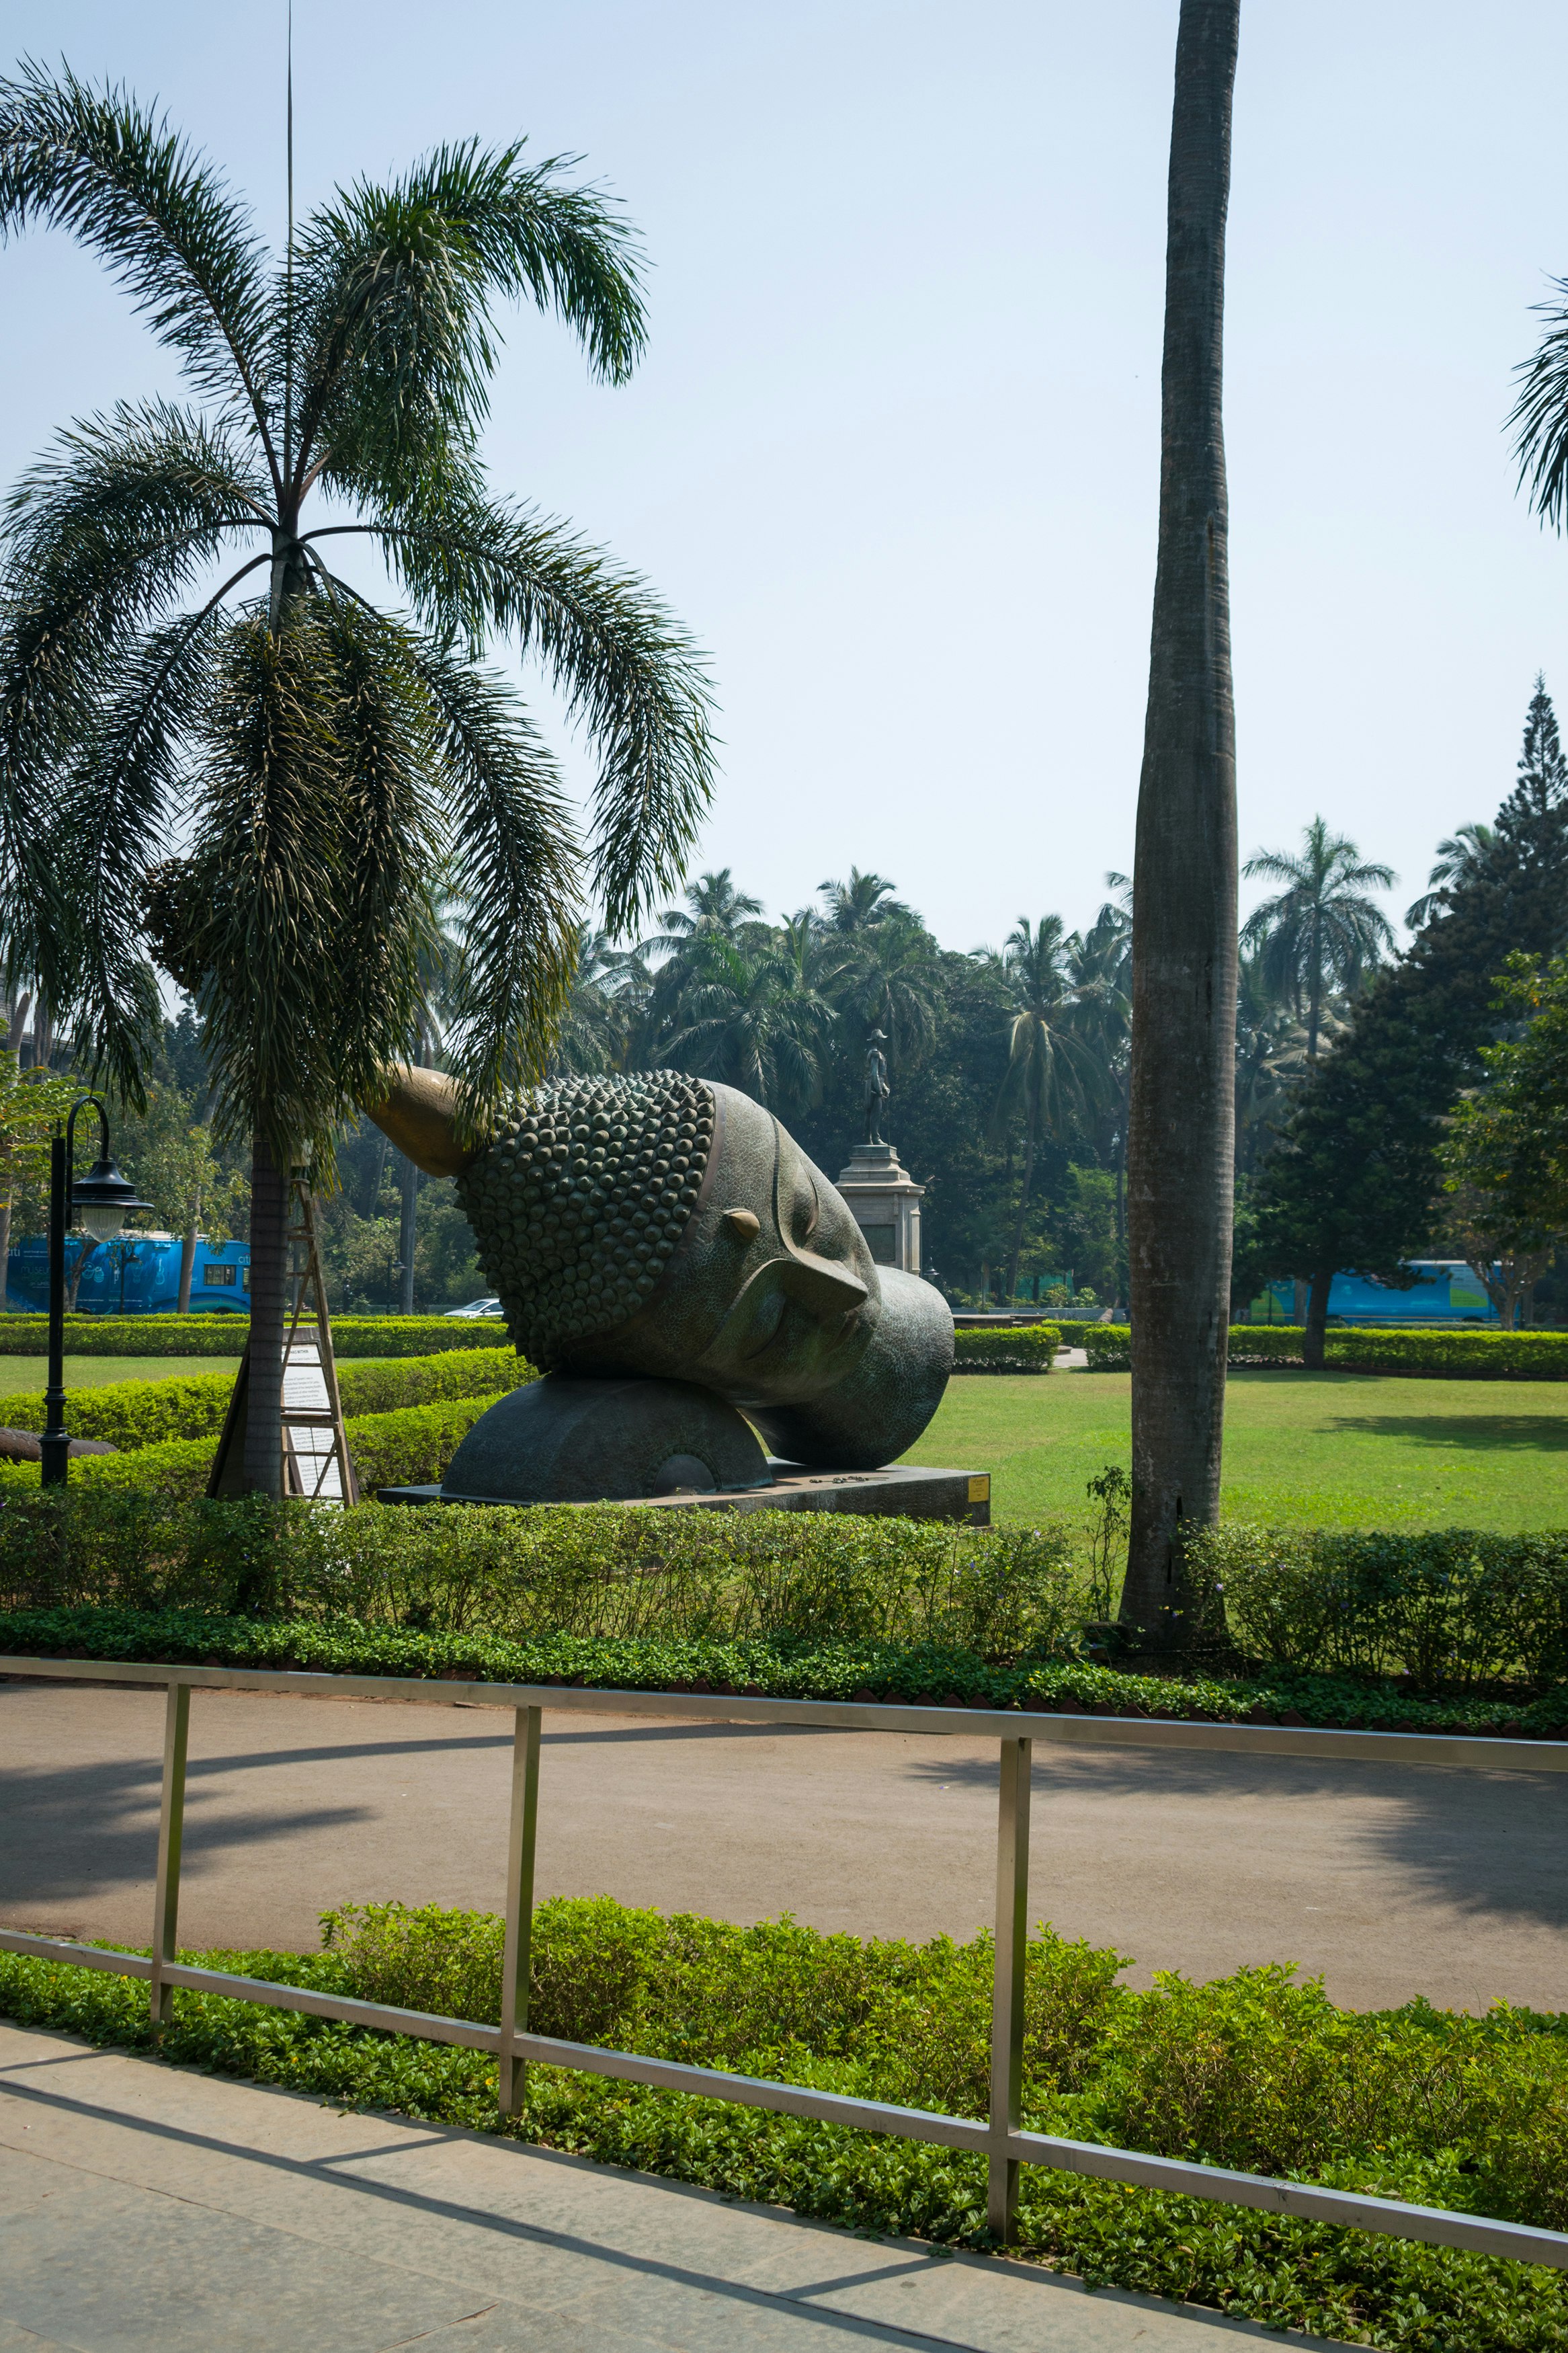 grey elephant statue on green grass field during daytime